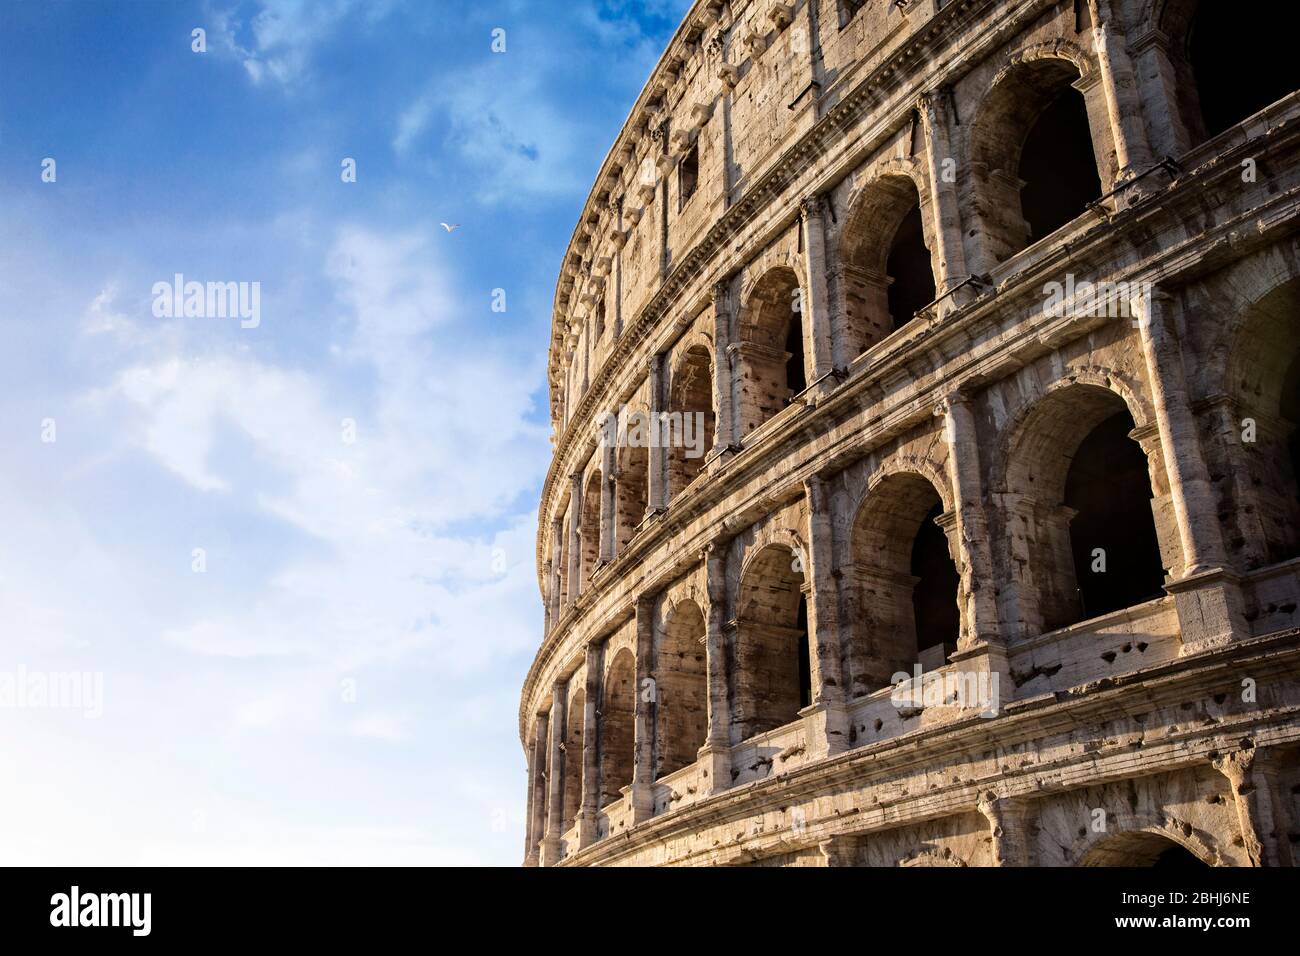 The exterior facade of the historic Colosseum in Rome, Italy. Stock Photo